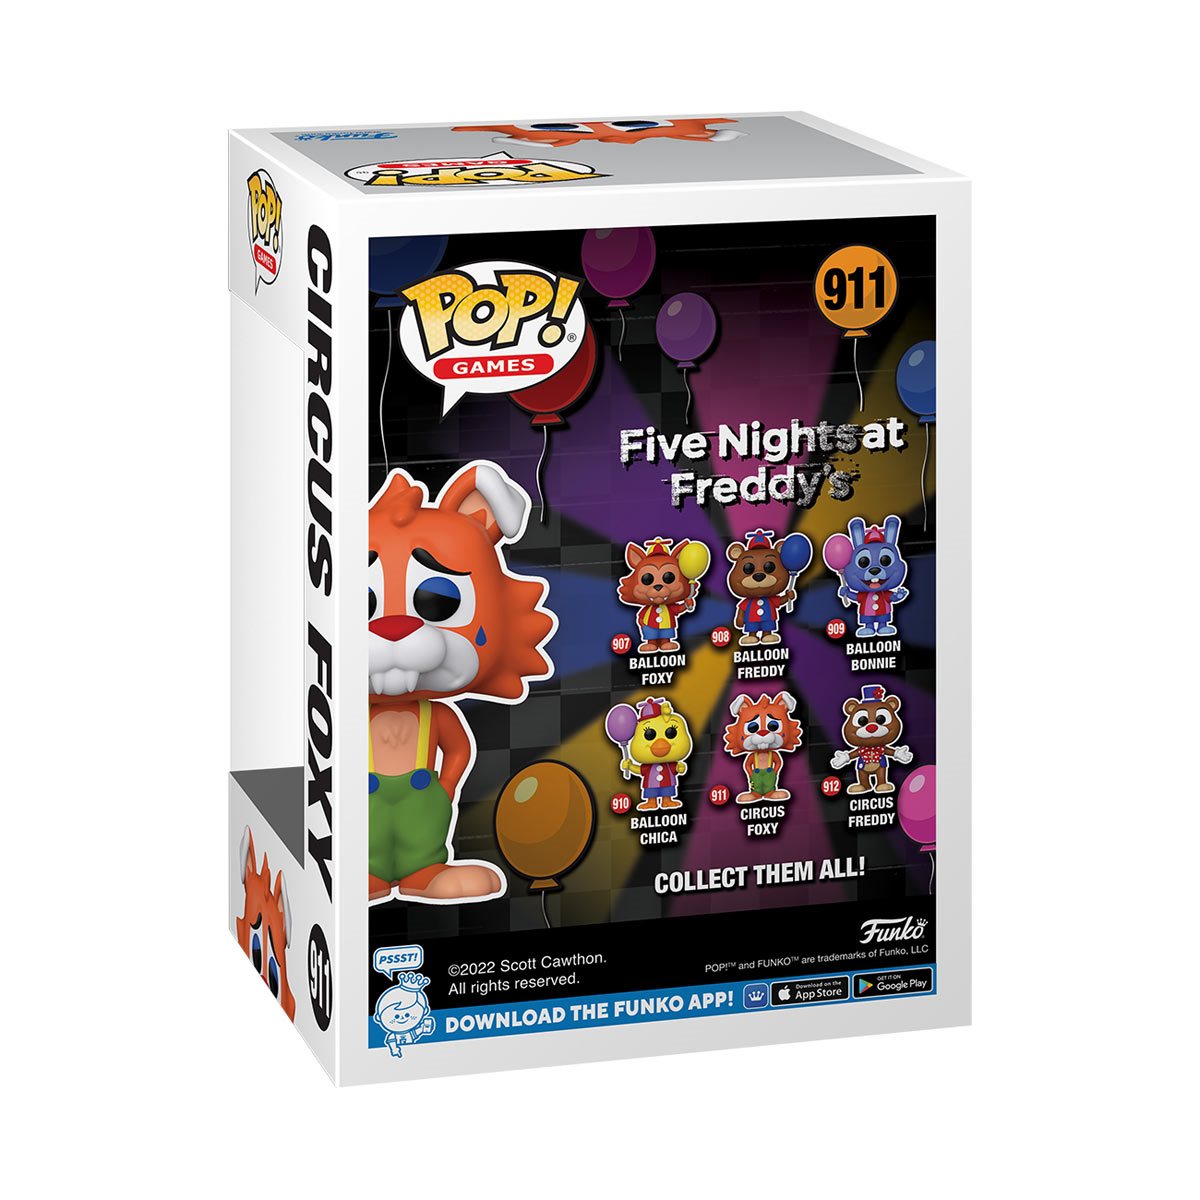 Five Nights at Freddys Funko Pop! Figures & Funko Toys - Entertainment Earth